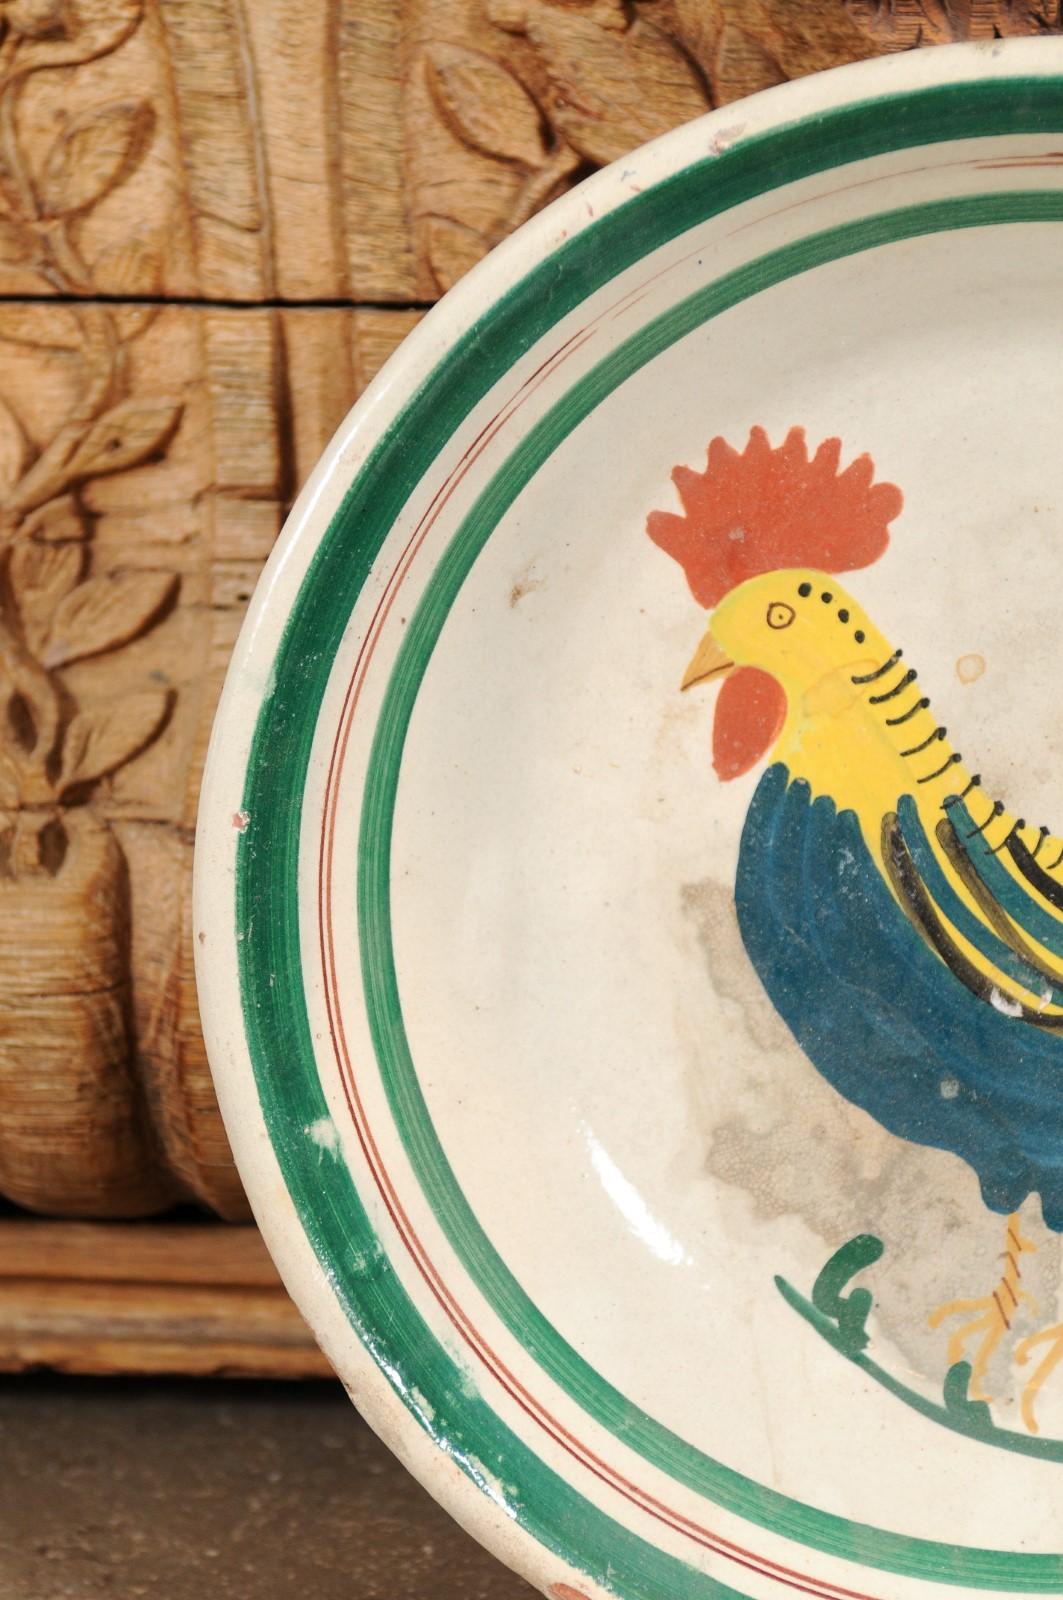 Italian Early 20th Century Pottery Bowl with Rooster Motif and Green Border For Sale 3